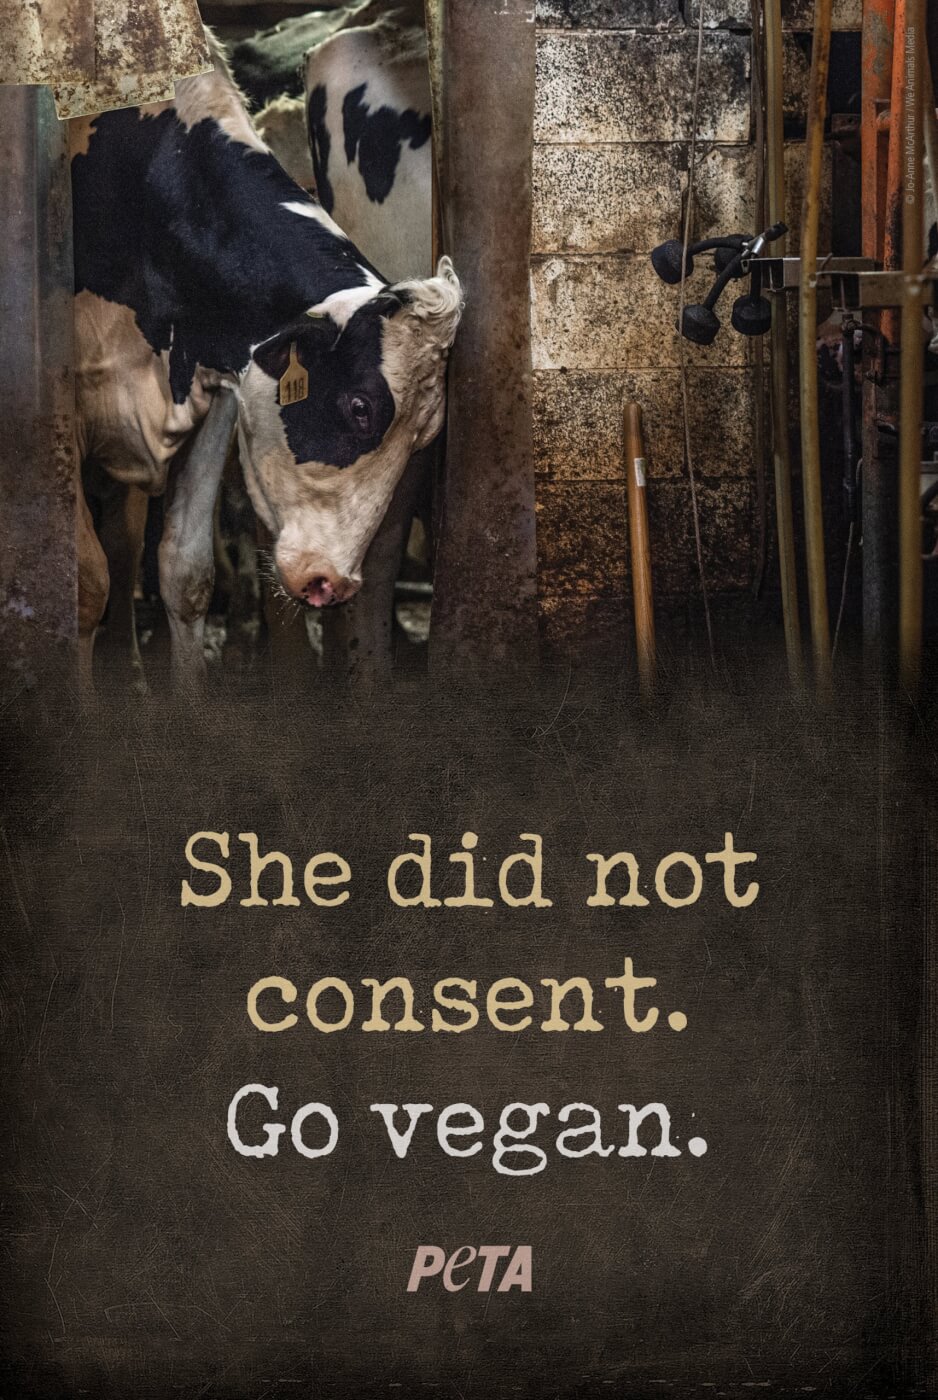 PETA ad with a cow used for her milk lowering her head and the message: "She did not consent. Go vegan."